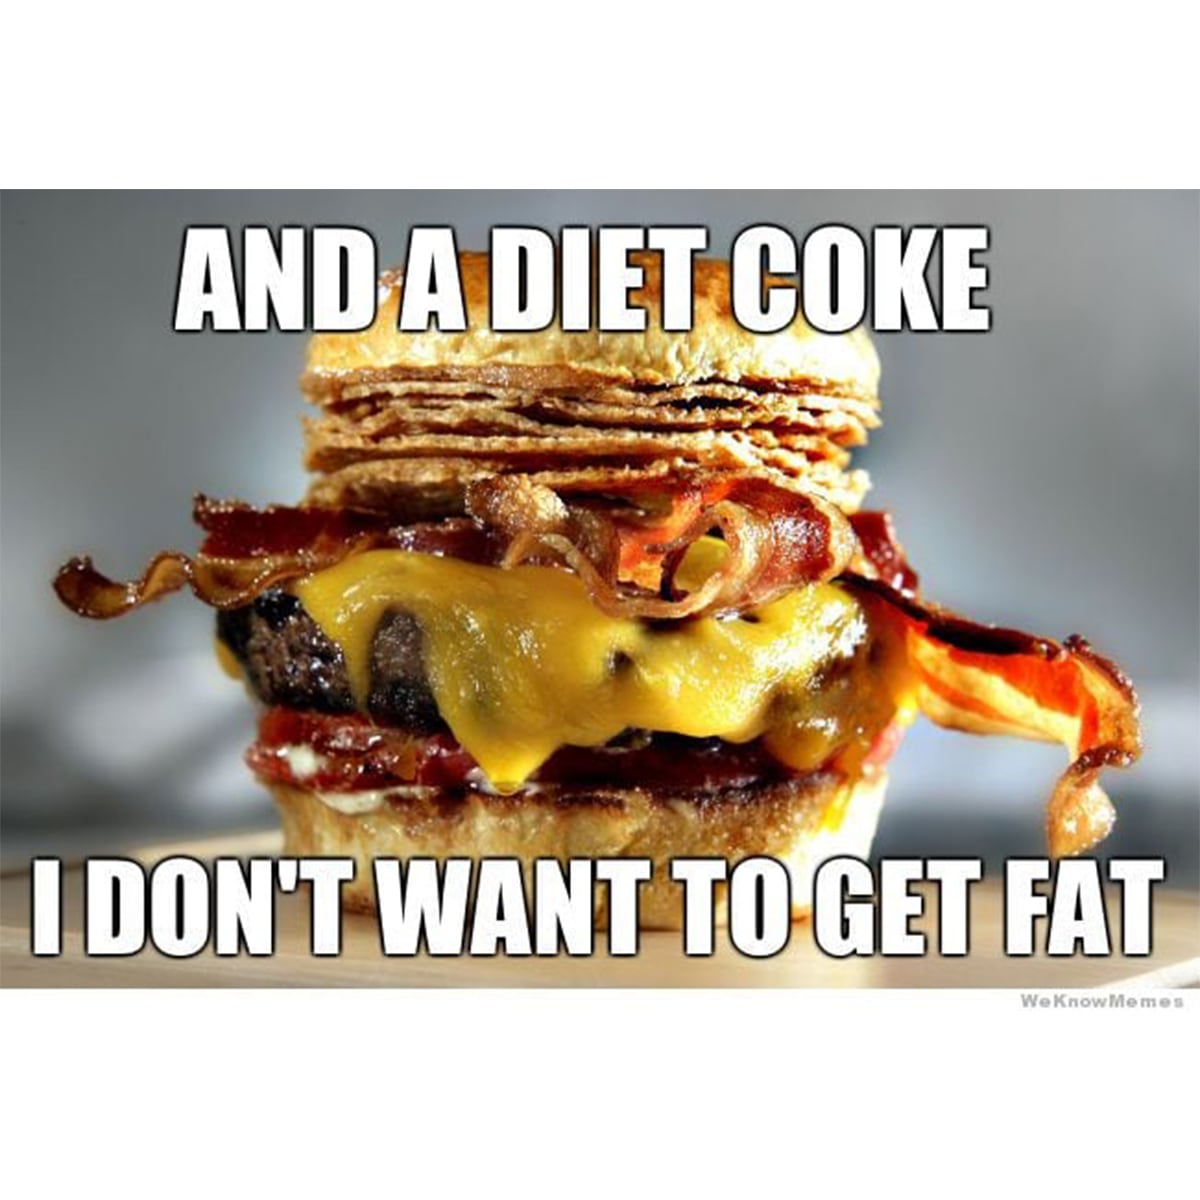 And diet coke. I don't want to get fat.